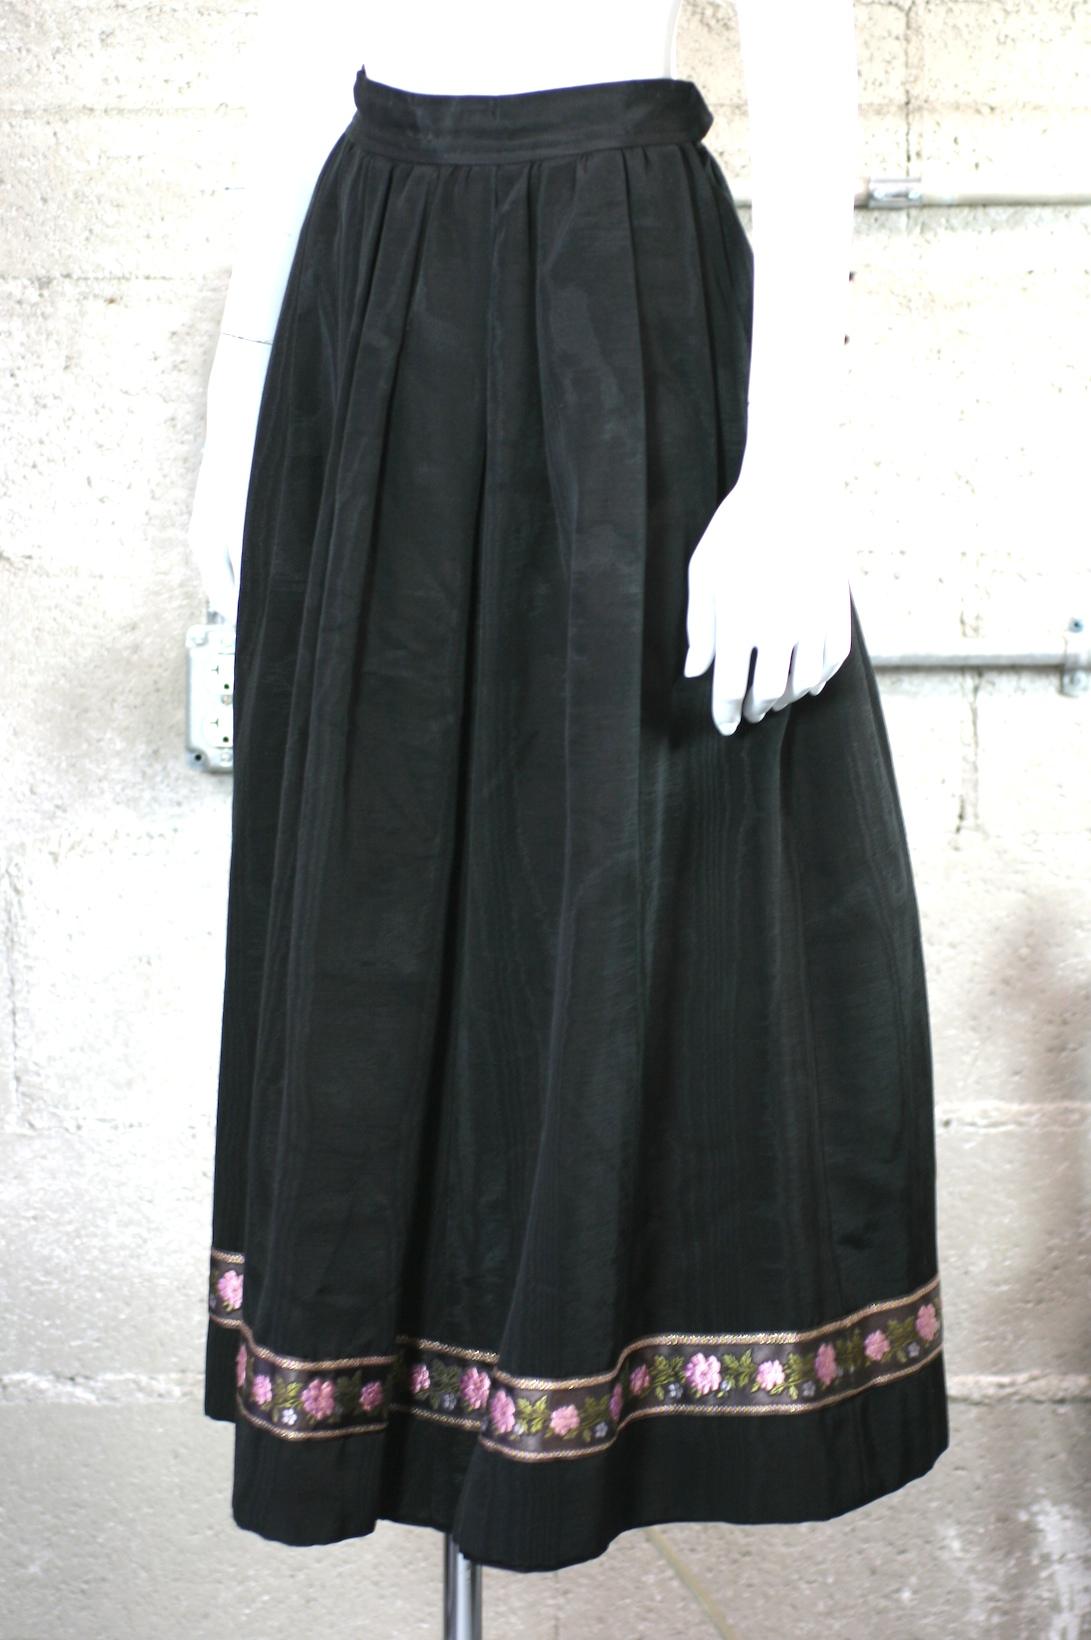 Yves Saint Laurent moire taffeta skirt with floral tapestry ribbon trim. Simple construction with gathered waist falling to full skirt. 
YSL Russian Collection. Side zip closure with 2 pockets. 1970's France.
Vintage size 38,   
Waist 24